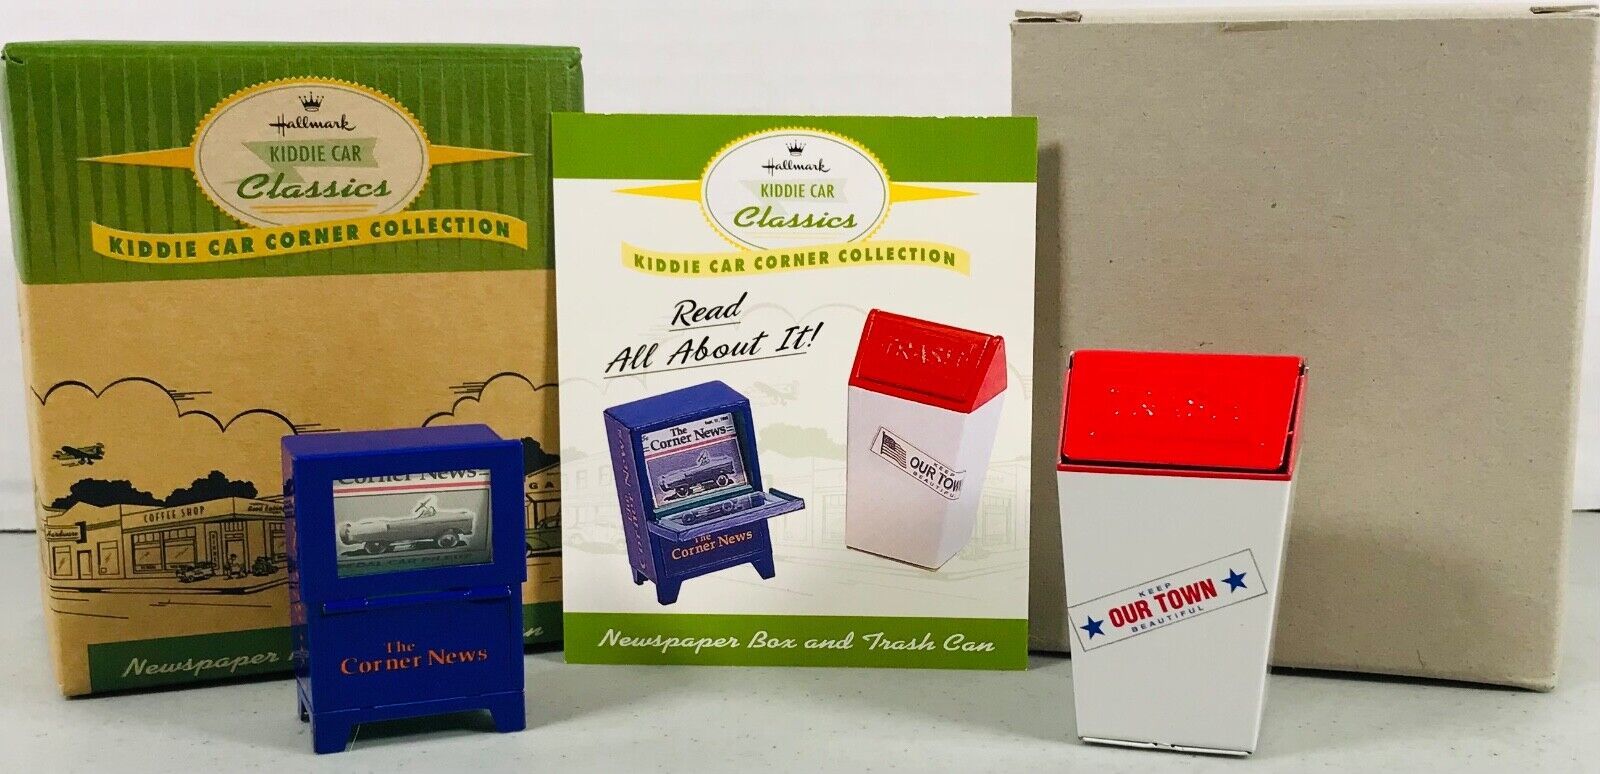 Primary image for 1998 Hallmark Kiddie Car Classics Newspaper Box And Trash Can with Display Card